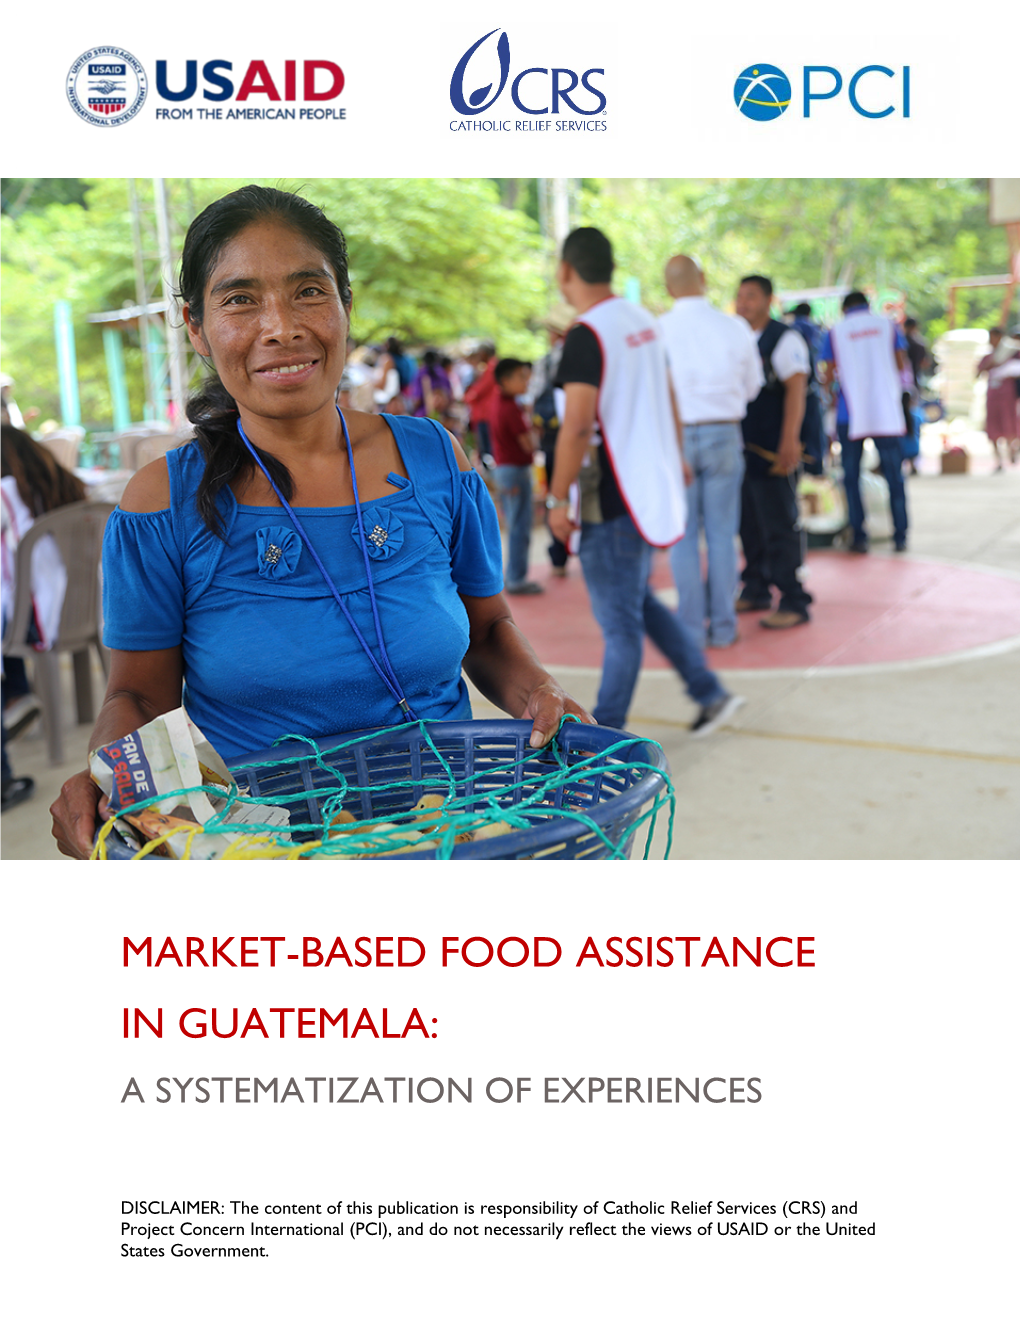 Market-Based Food Assistance in Guatemala